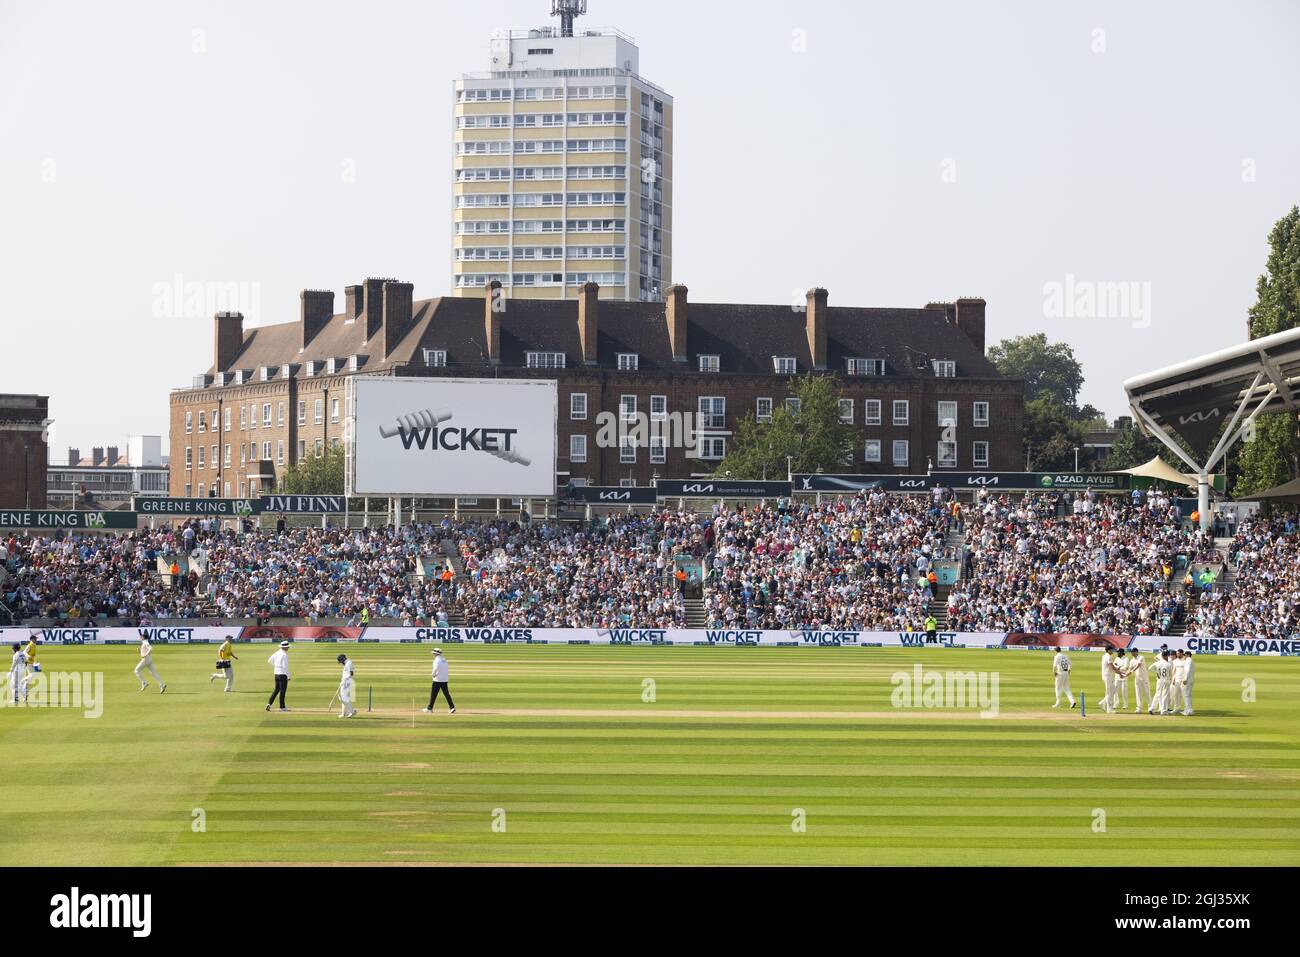 England cricket; The Oval Cricket Ground, or Kia Oval, July 2021, England v India test match, watched by crowds of fans in summer, The Oval, London UK Stock Photo